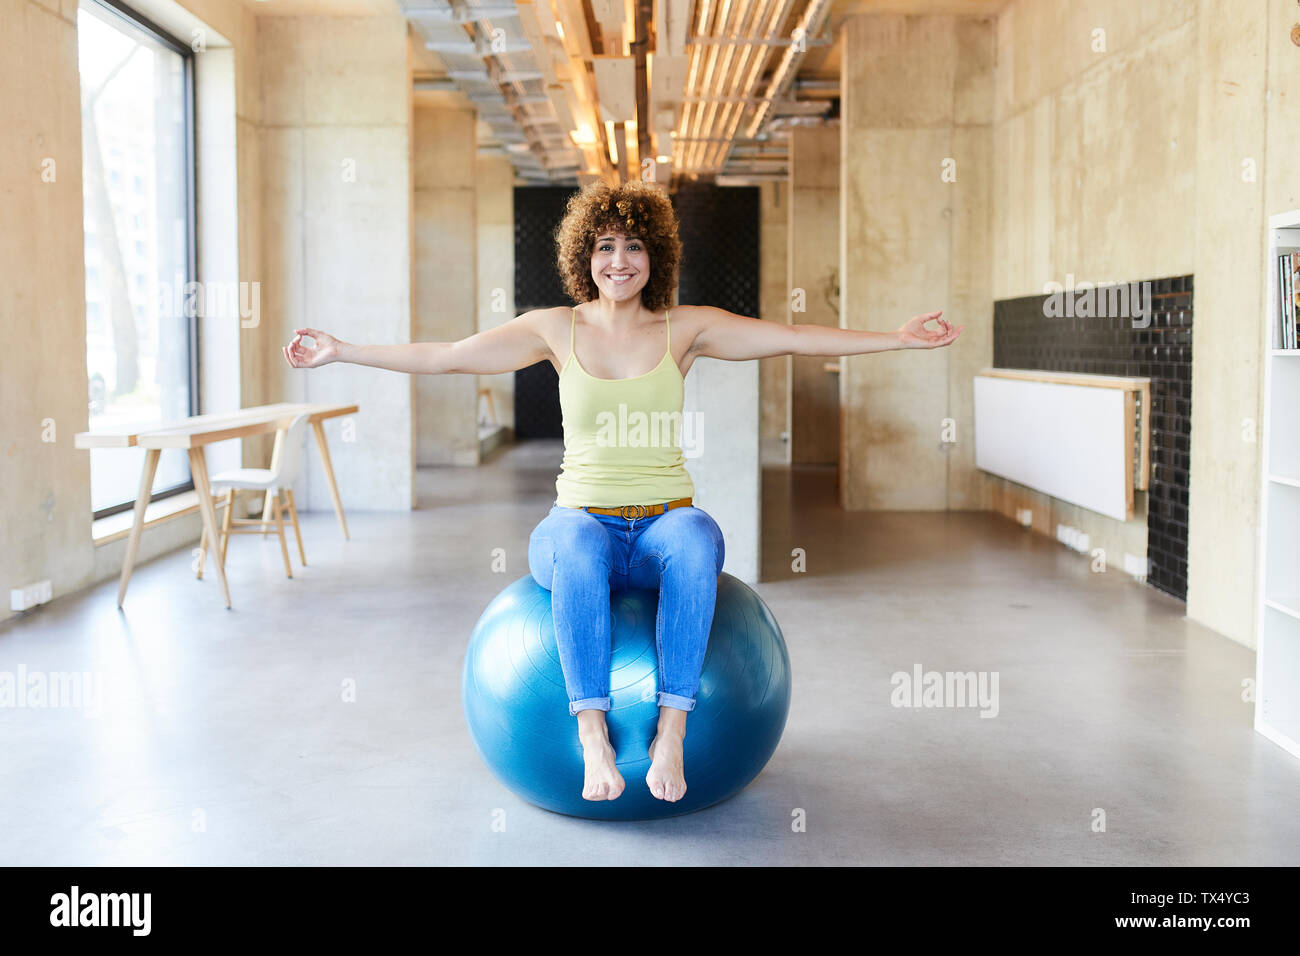 Portrait of smiling woman sitting on fitness ball in modern office Stock Photo